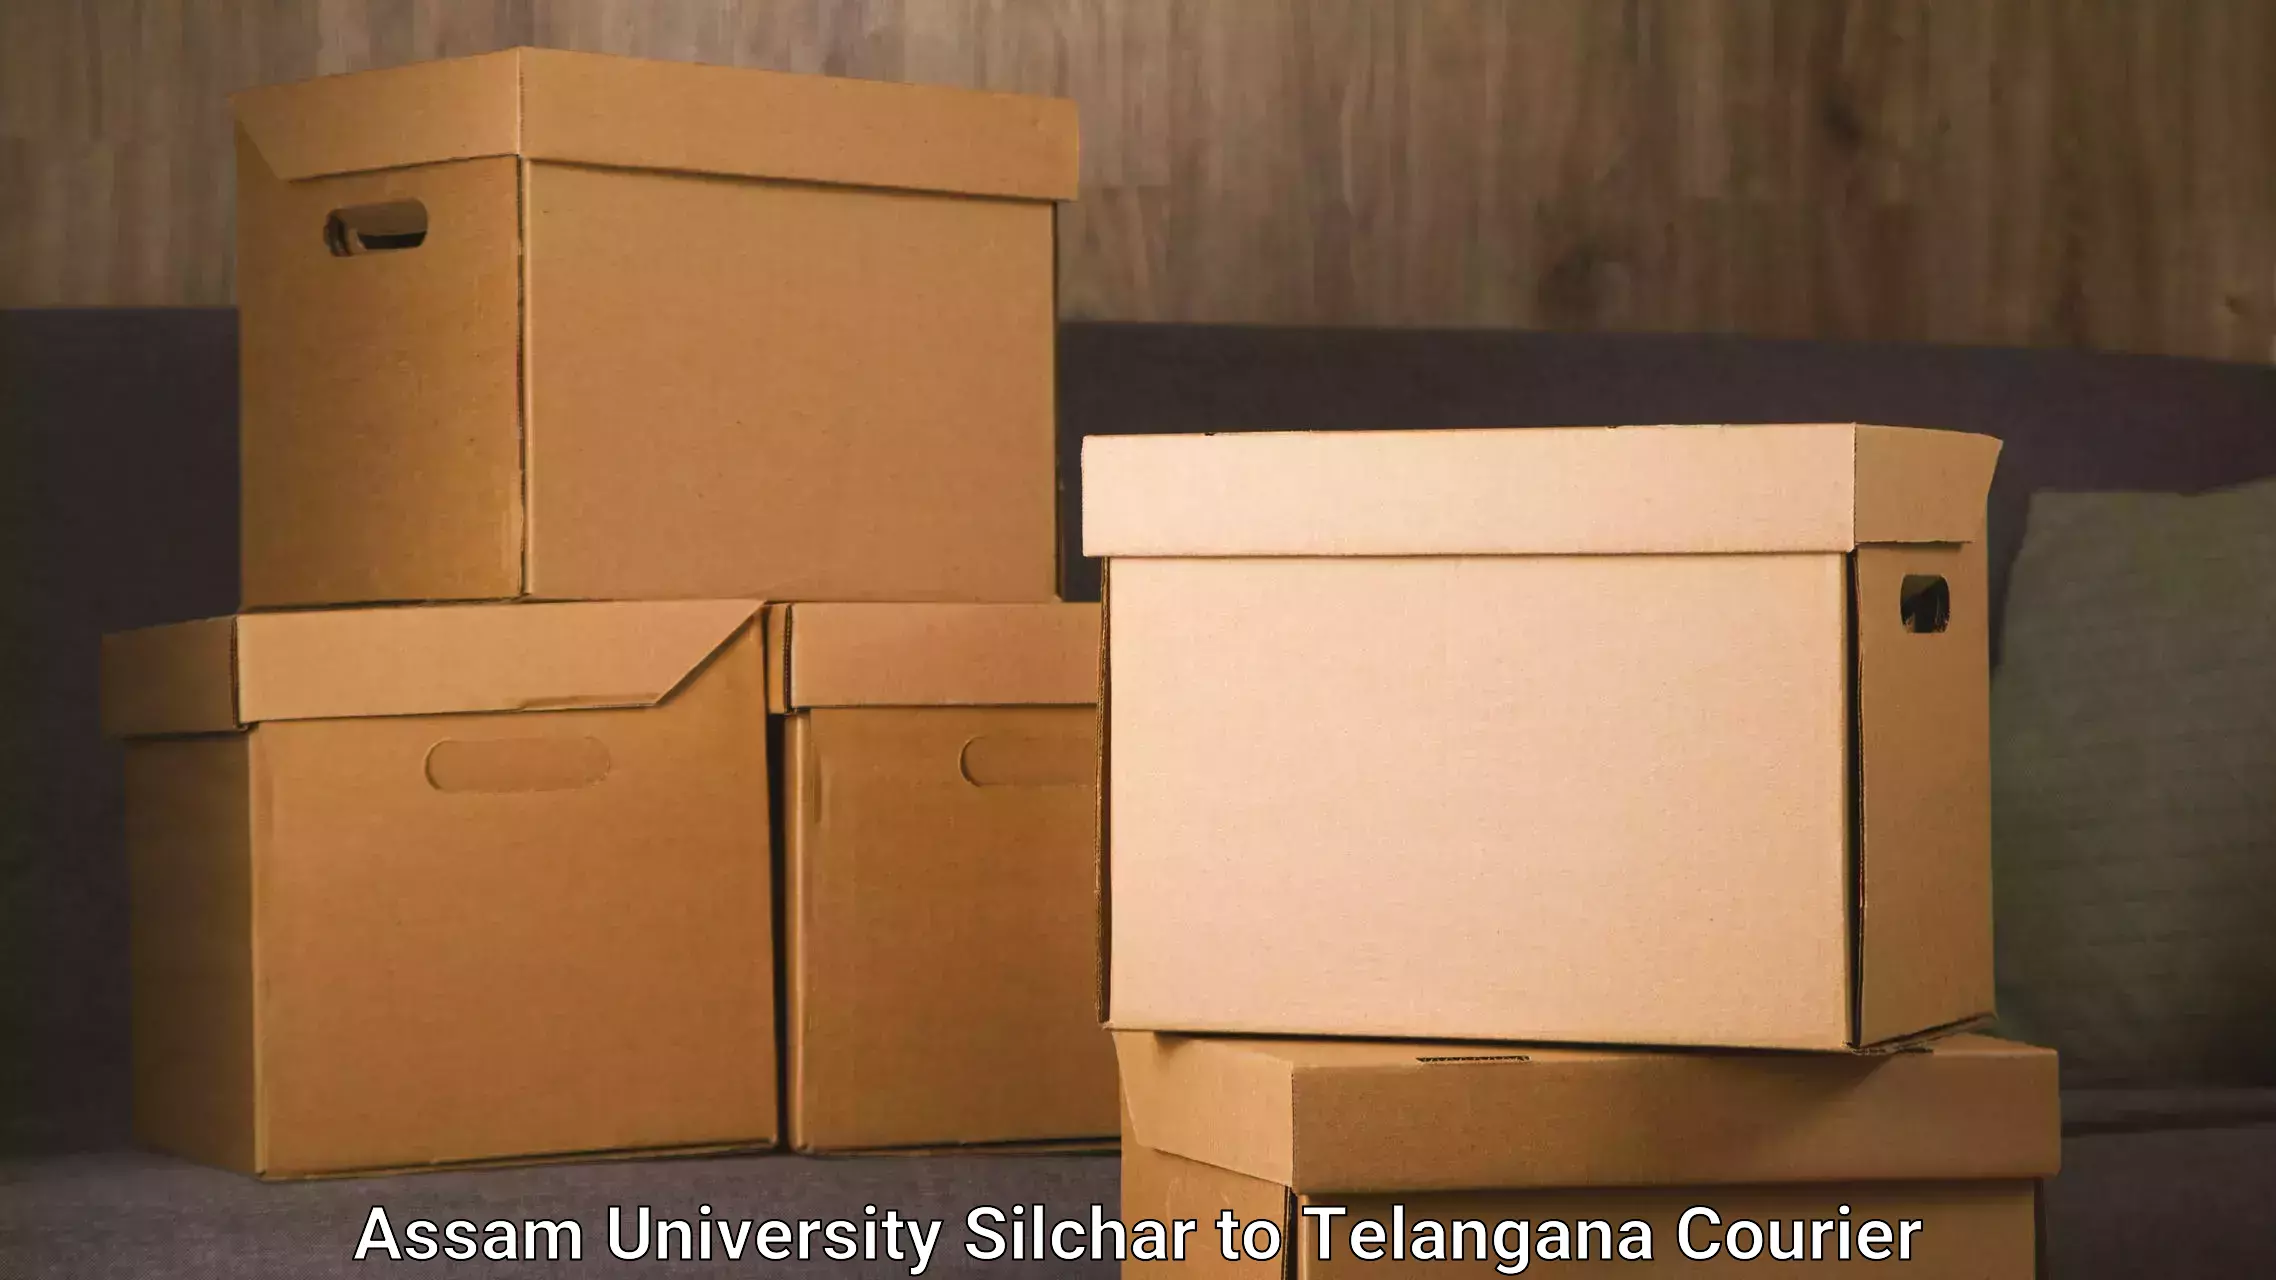 Package delivery network Assam University Silchar to Gollapalli